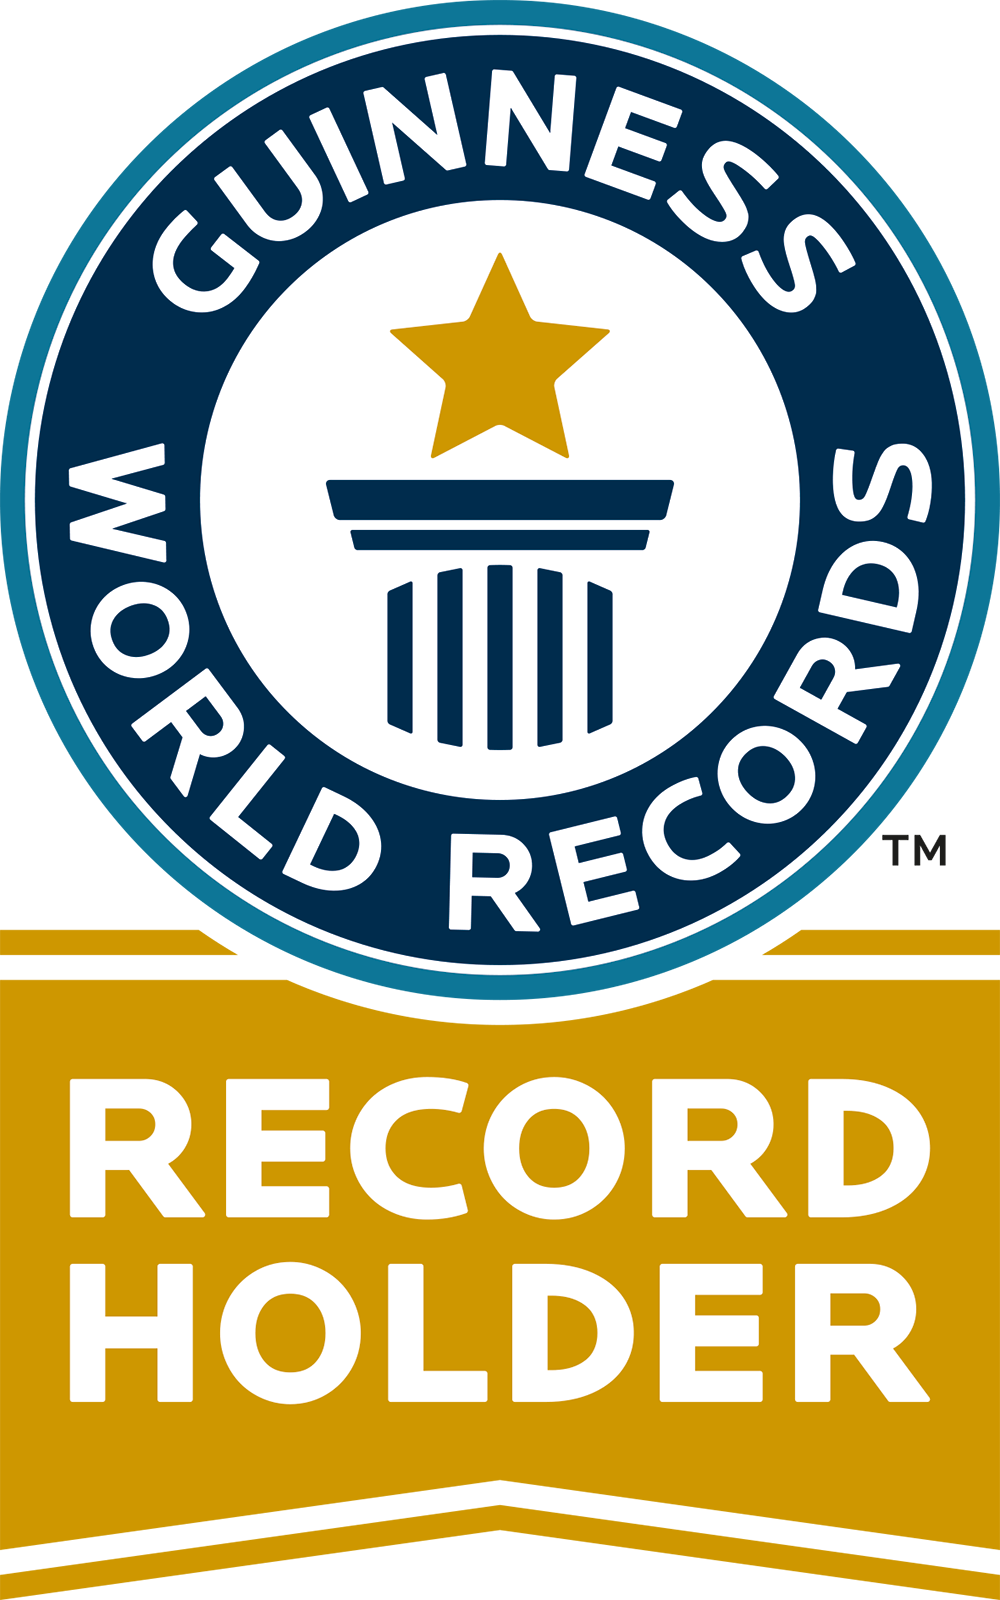 https://www.knowbe4.com/hs-fs/hubfs/Guinness%20World%20Record%20Holder.png?width=400&name=Guinness%20World%20Record%20Holder.png